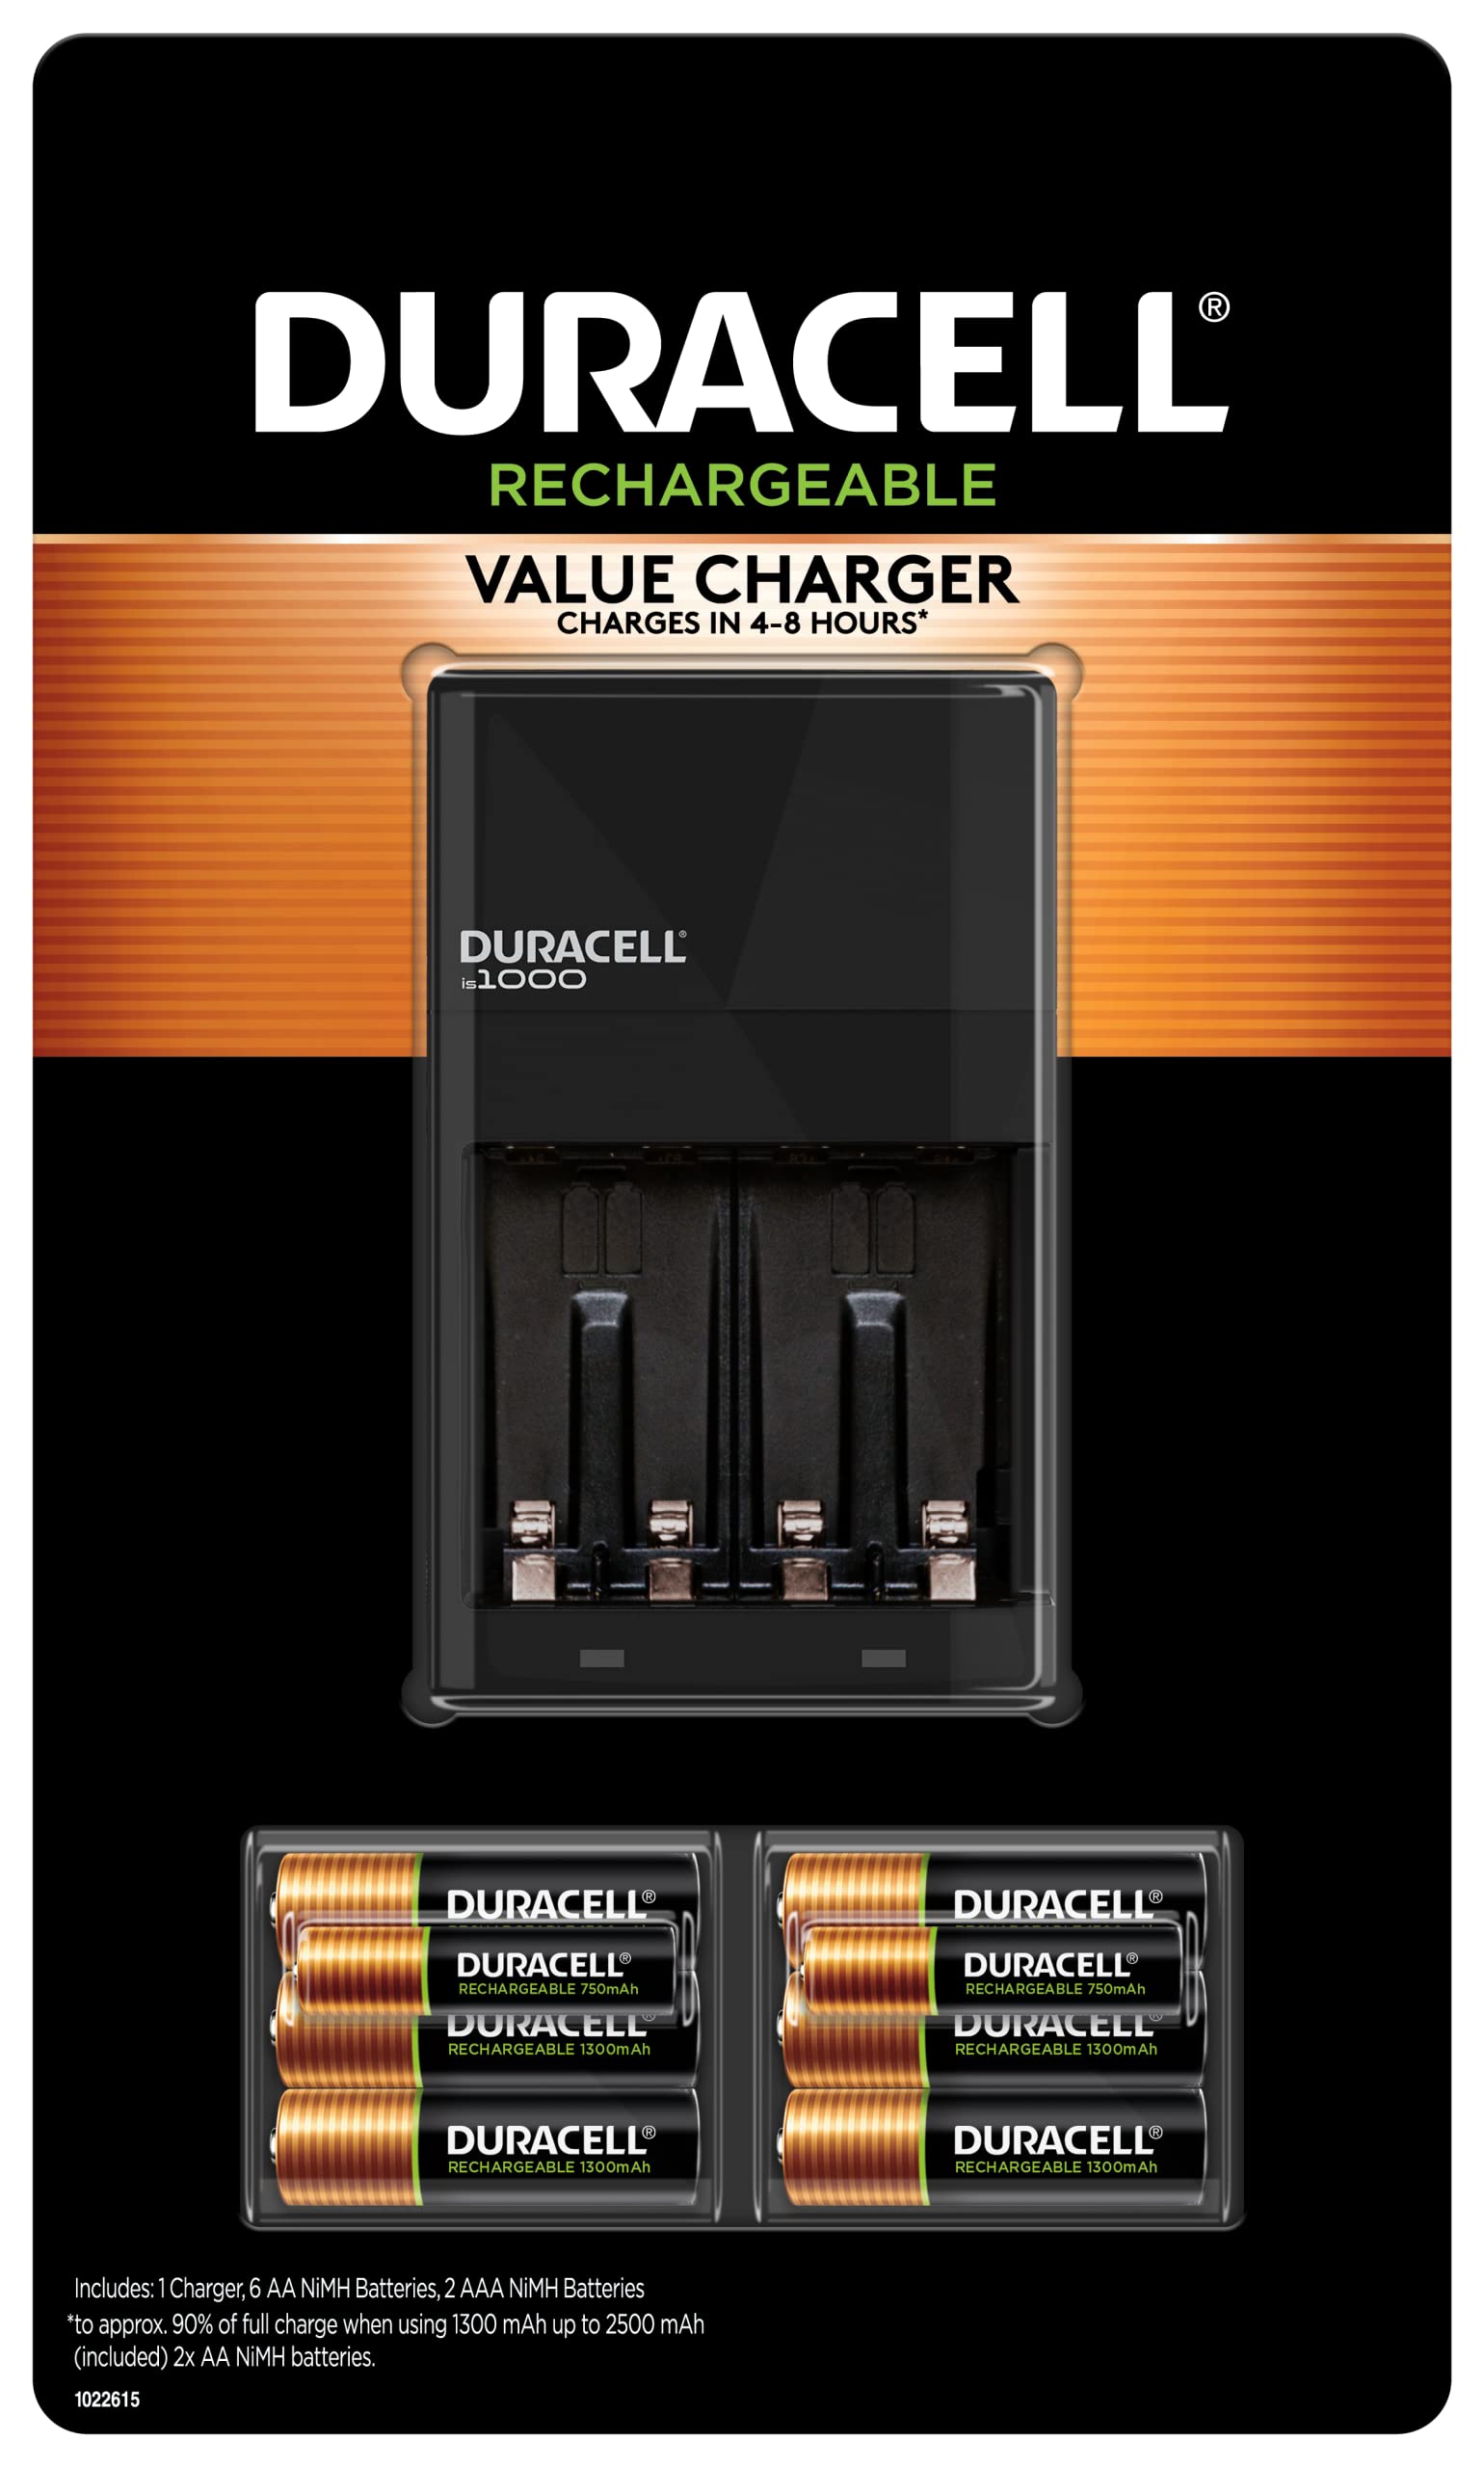 Duracell Ion Speed 1000 Battery Charger for AA and AAA batteries, Includes 6 AA and 2 AAA Pre-Charged Rechargeable Batteries, for Household and Business Devices